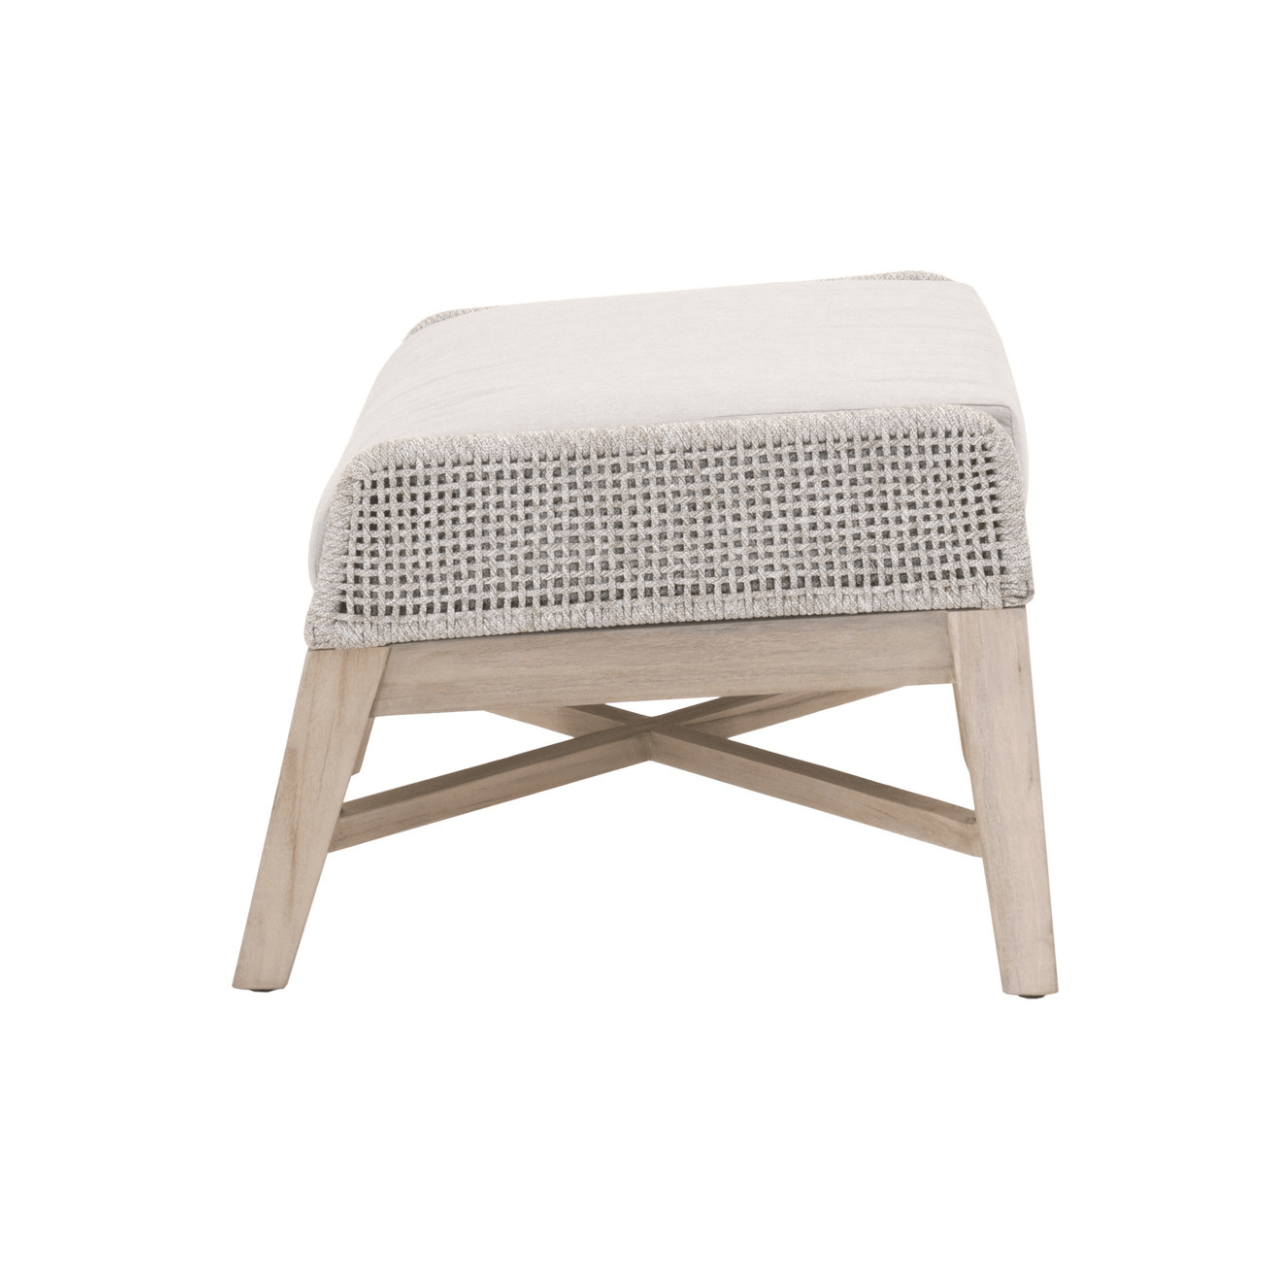 Woven Tapestry Outdoor Footstool